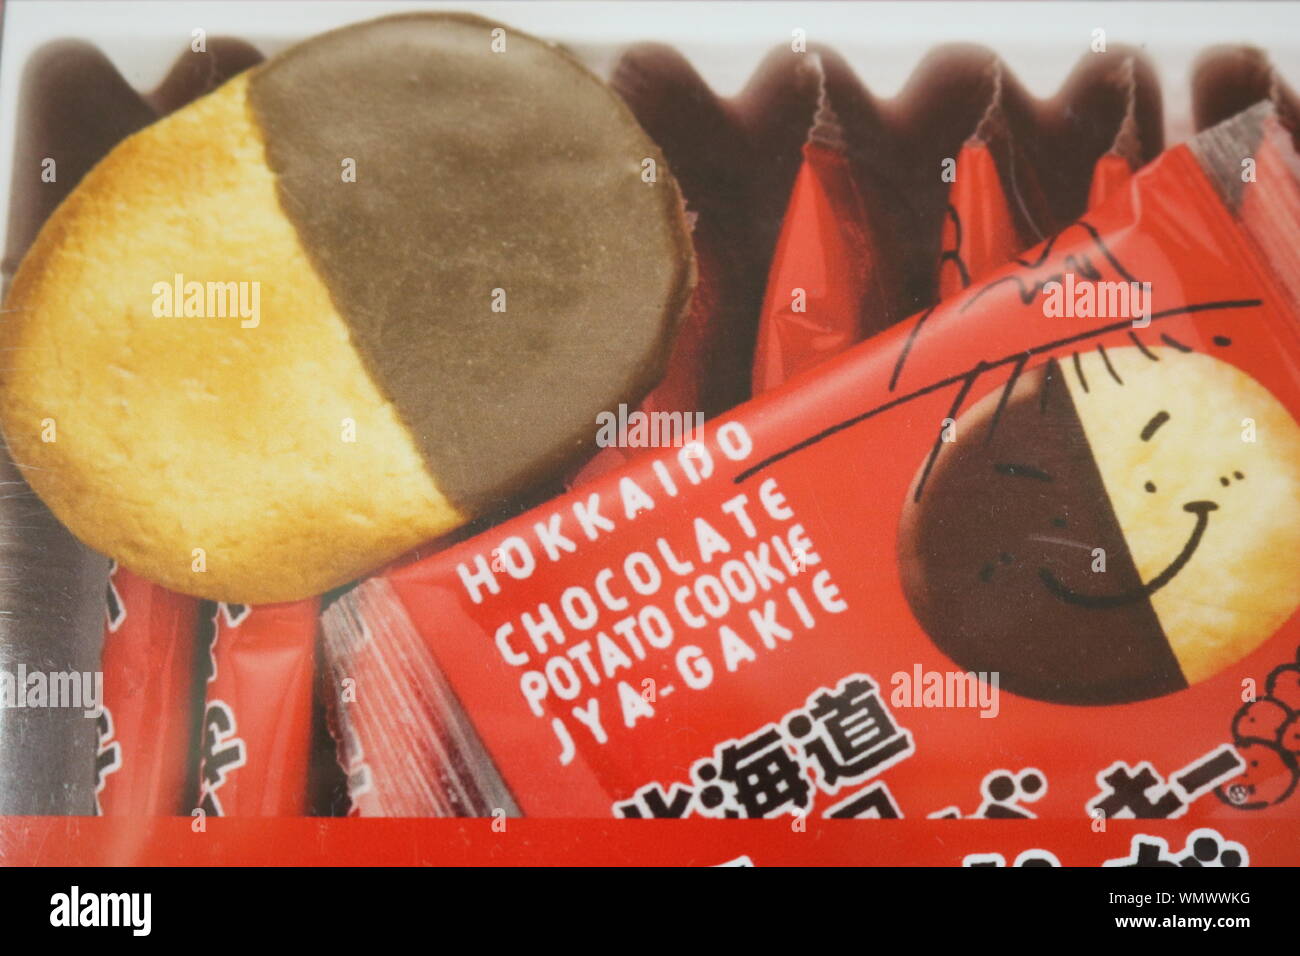 Japanese biscuits individually wrapped for giving as presents Stock Photo